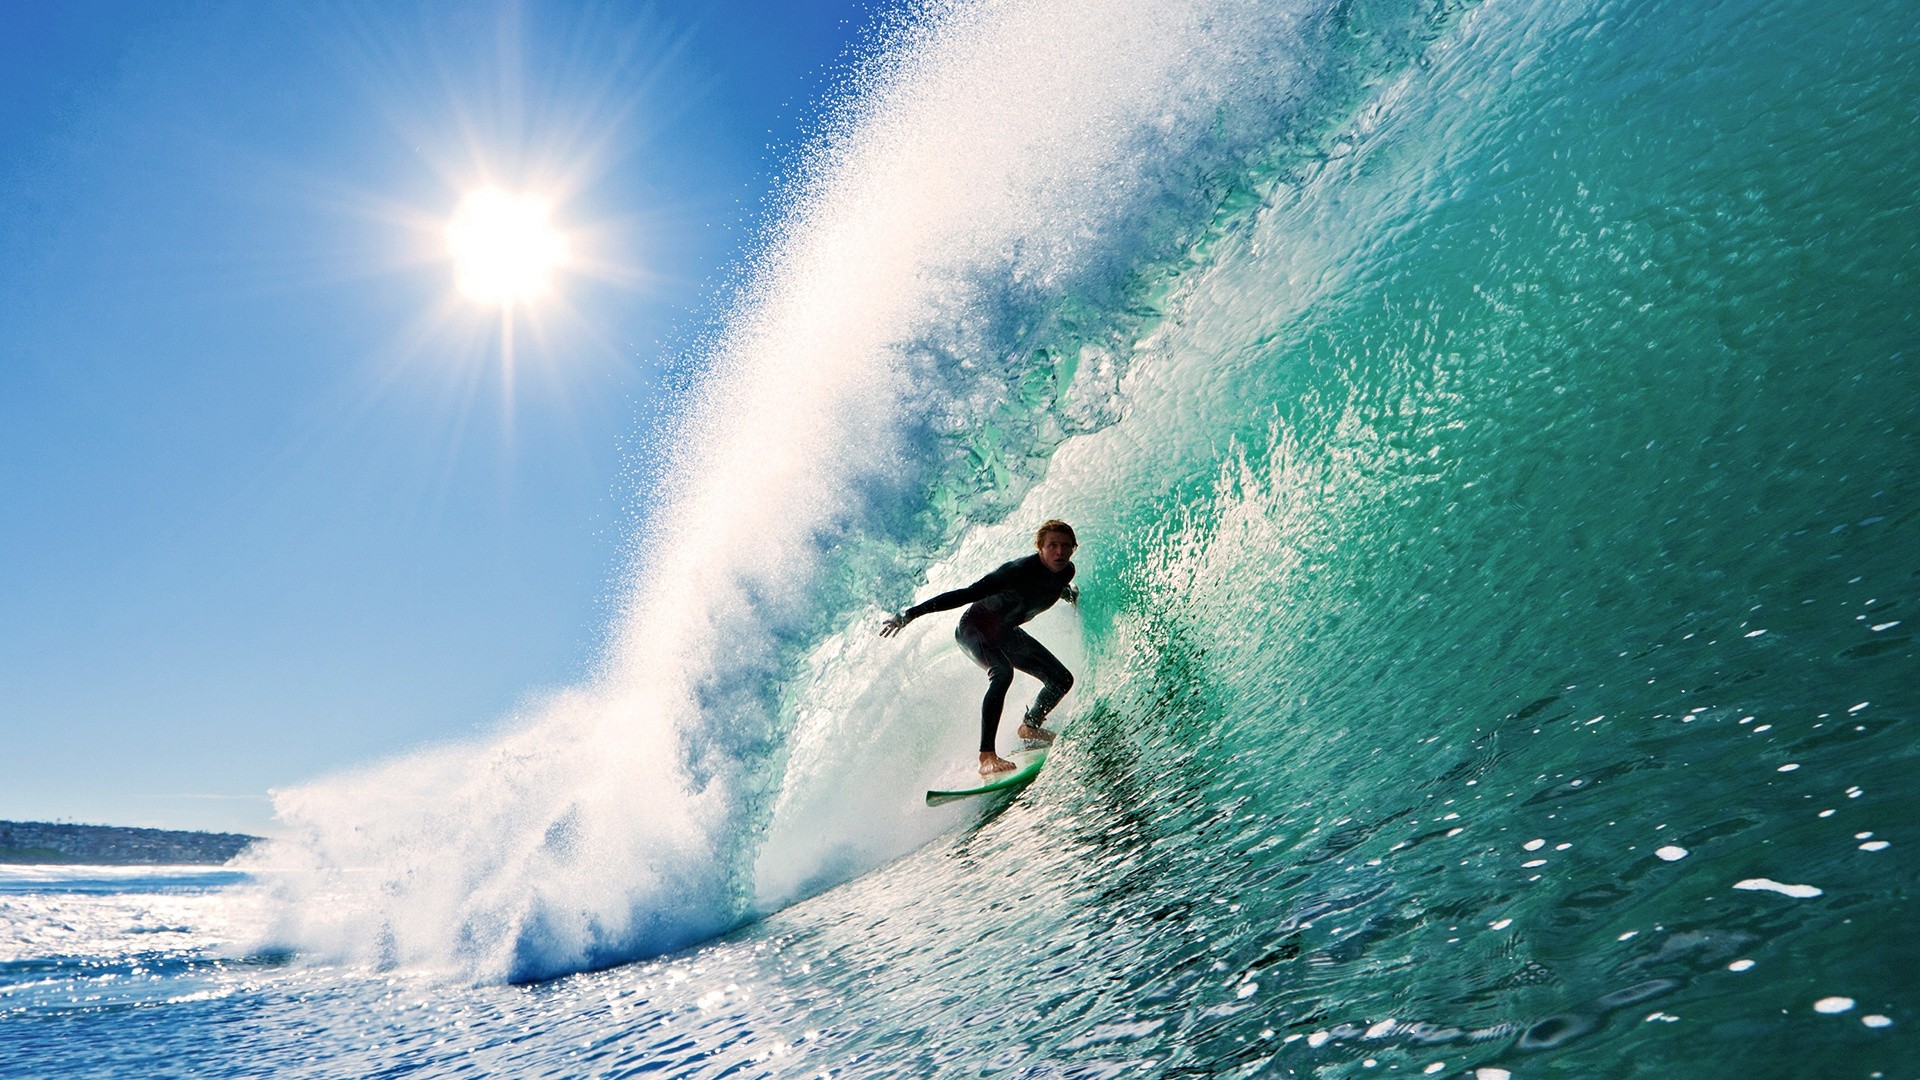 Preview wallpaper surfing, wave, sun, sky 1920×1080